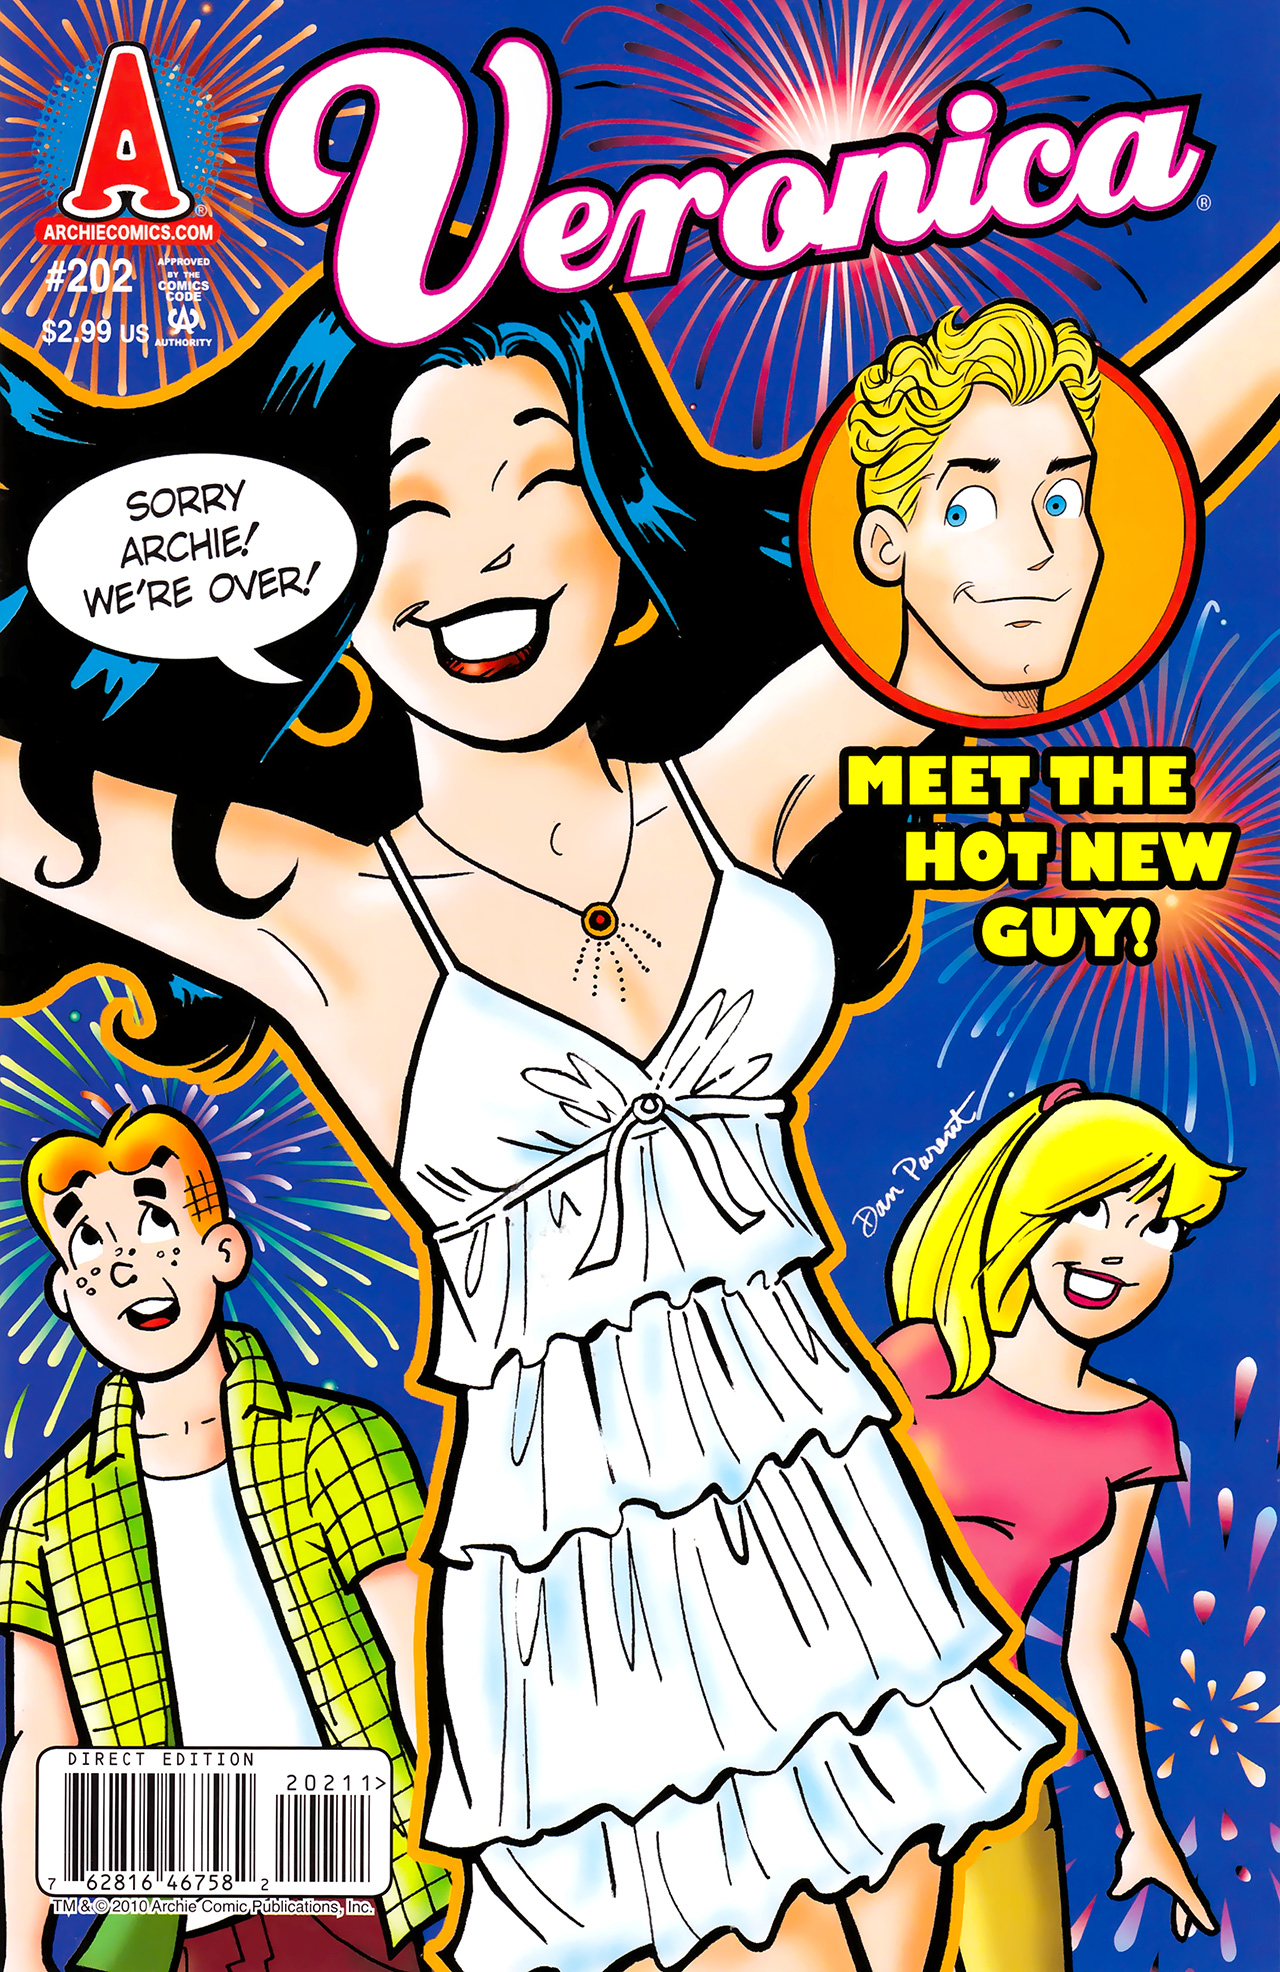 Read online Veronica comic -  Issue #202 - 1